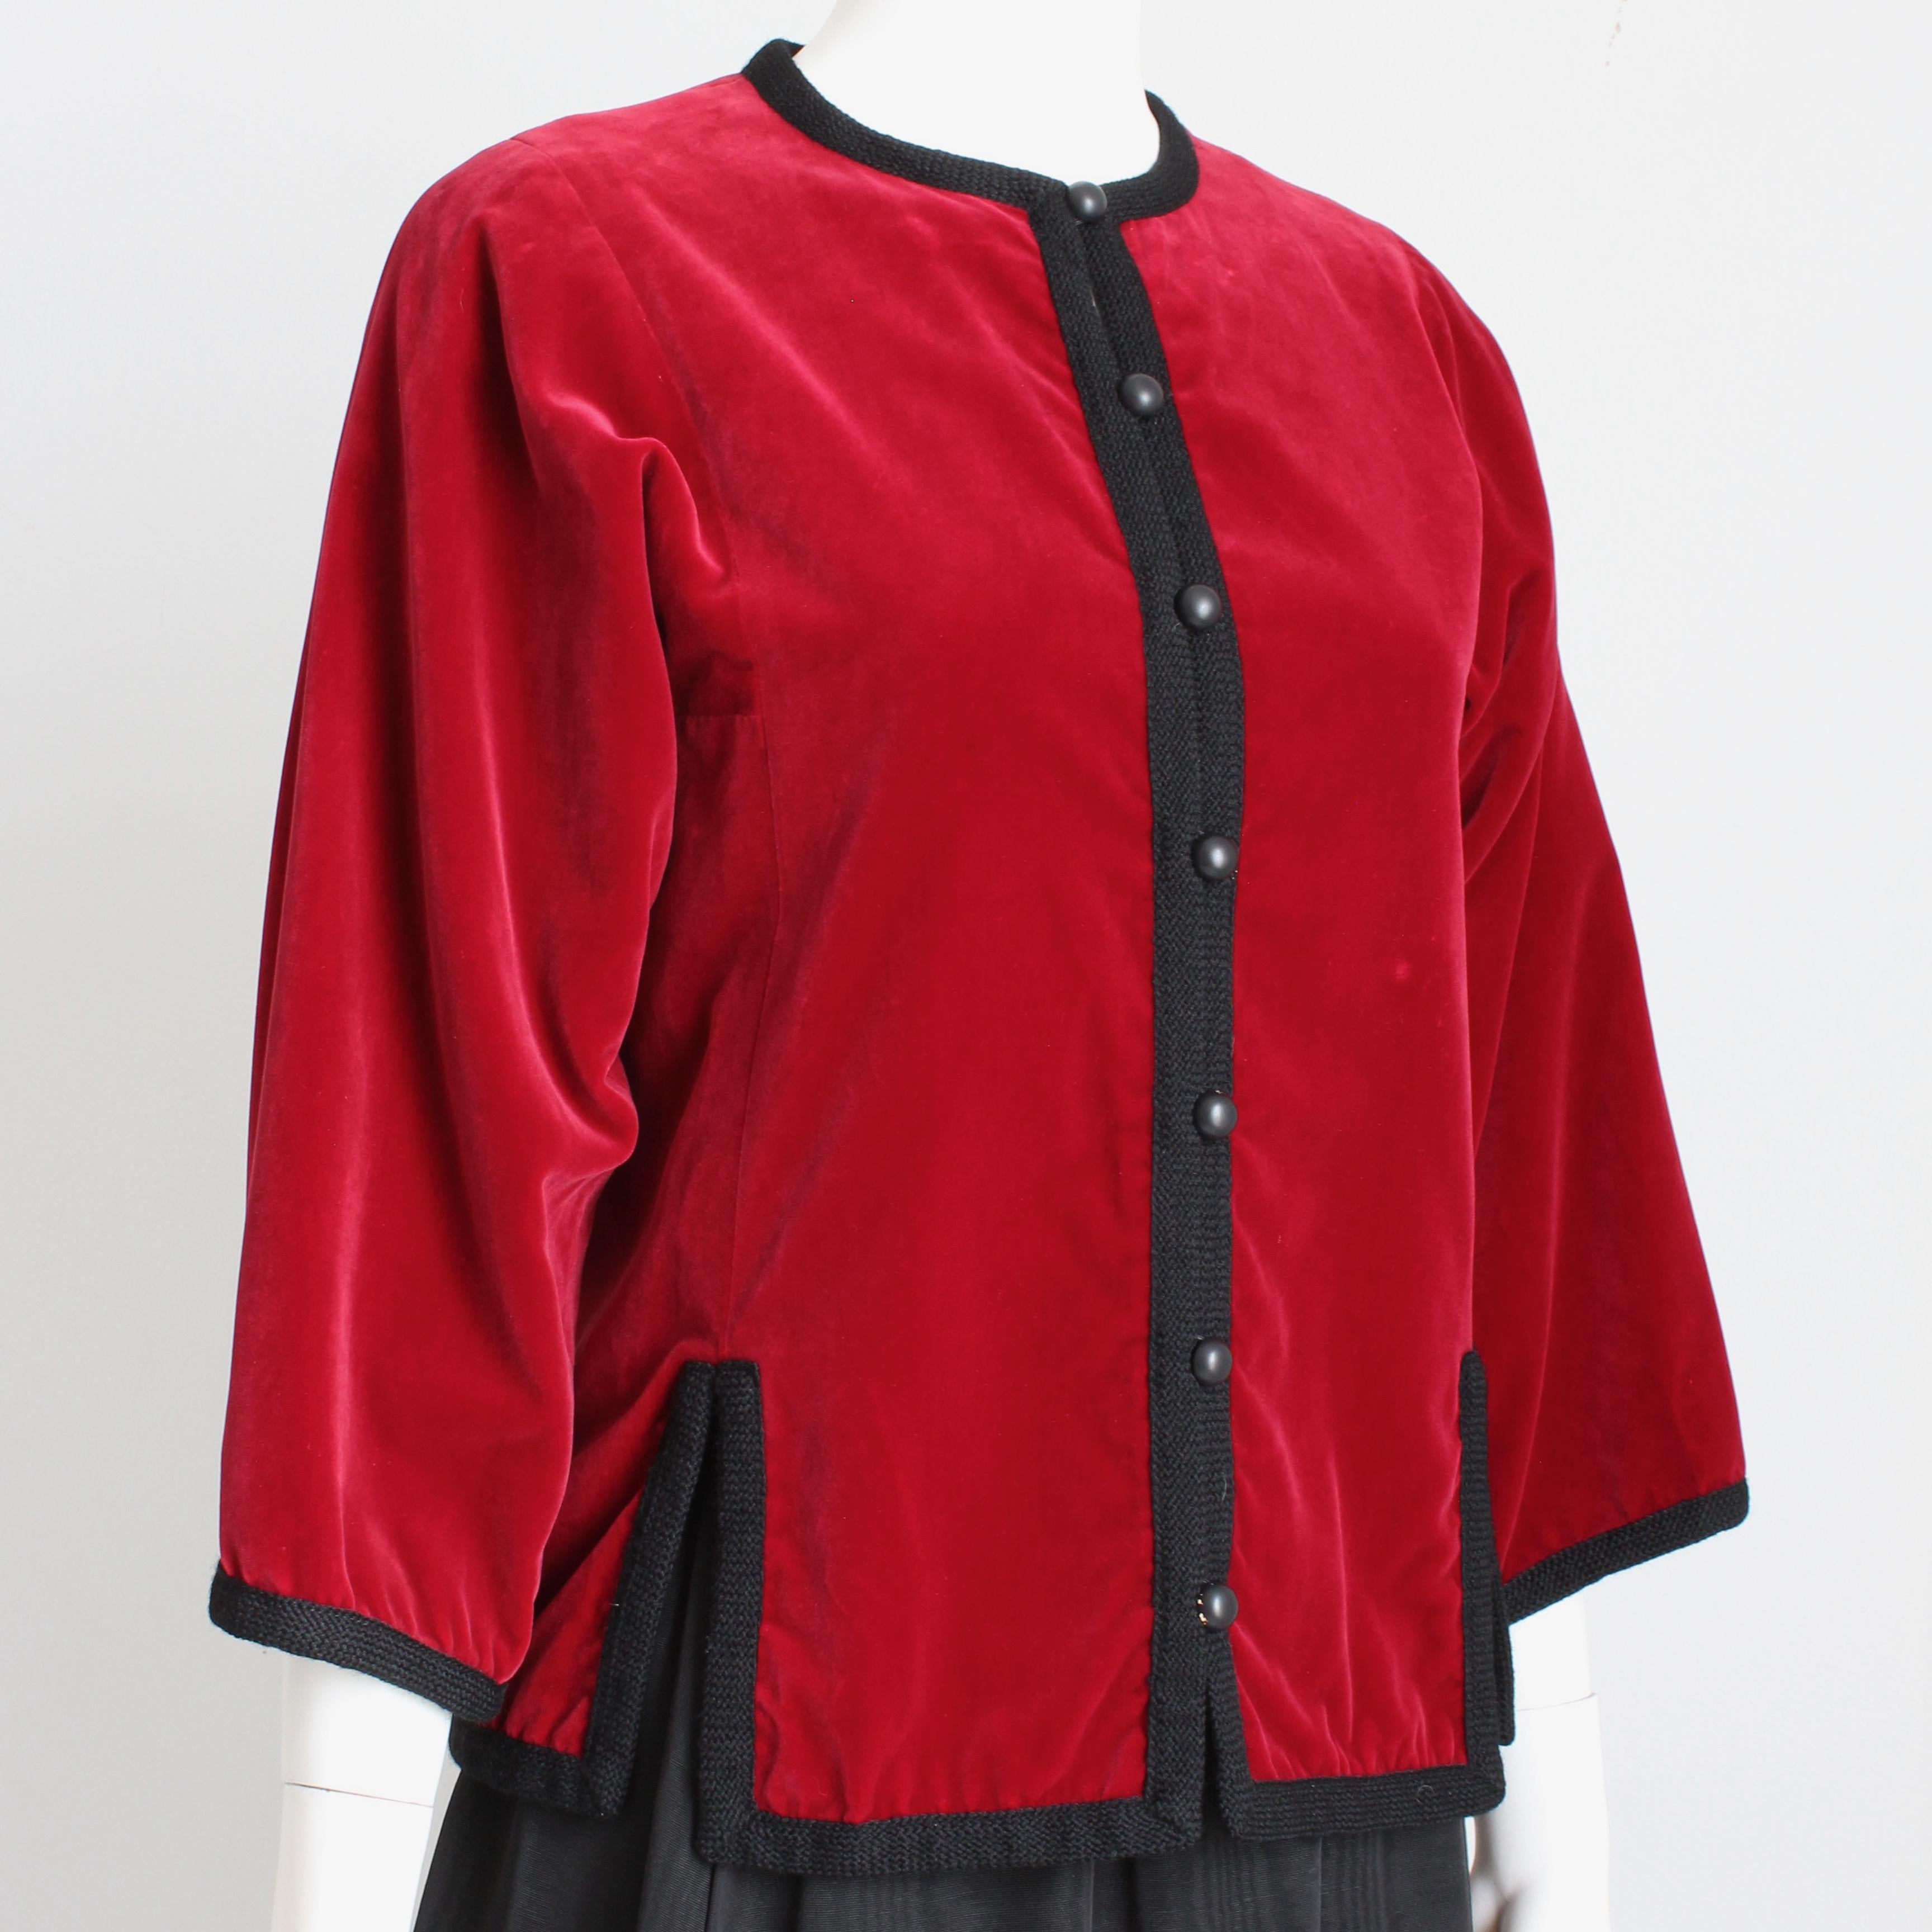 Authentic, preowned, vintage Yves Saint Laurent Rive Gauche jacket, likely made for the Ballet Russes aka Russian collection in the late 70s. Made from red velvet, it's trimmed in black braid and fastens with button/loop closures. Fully-lined in